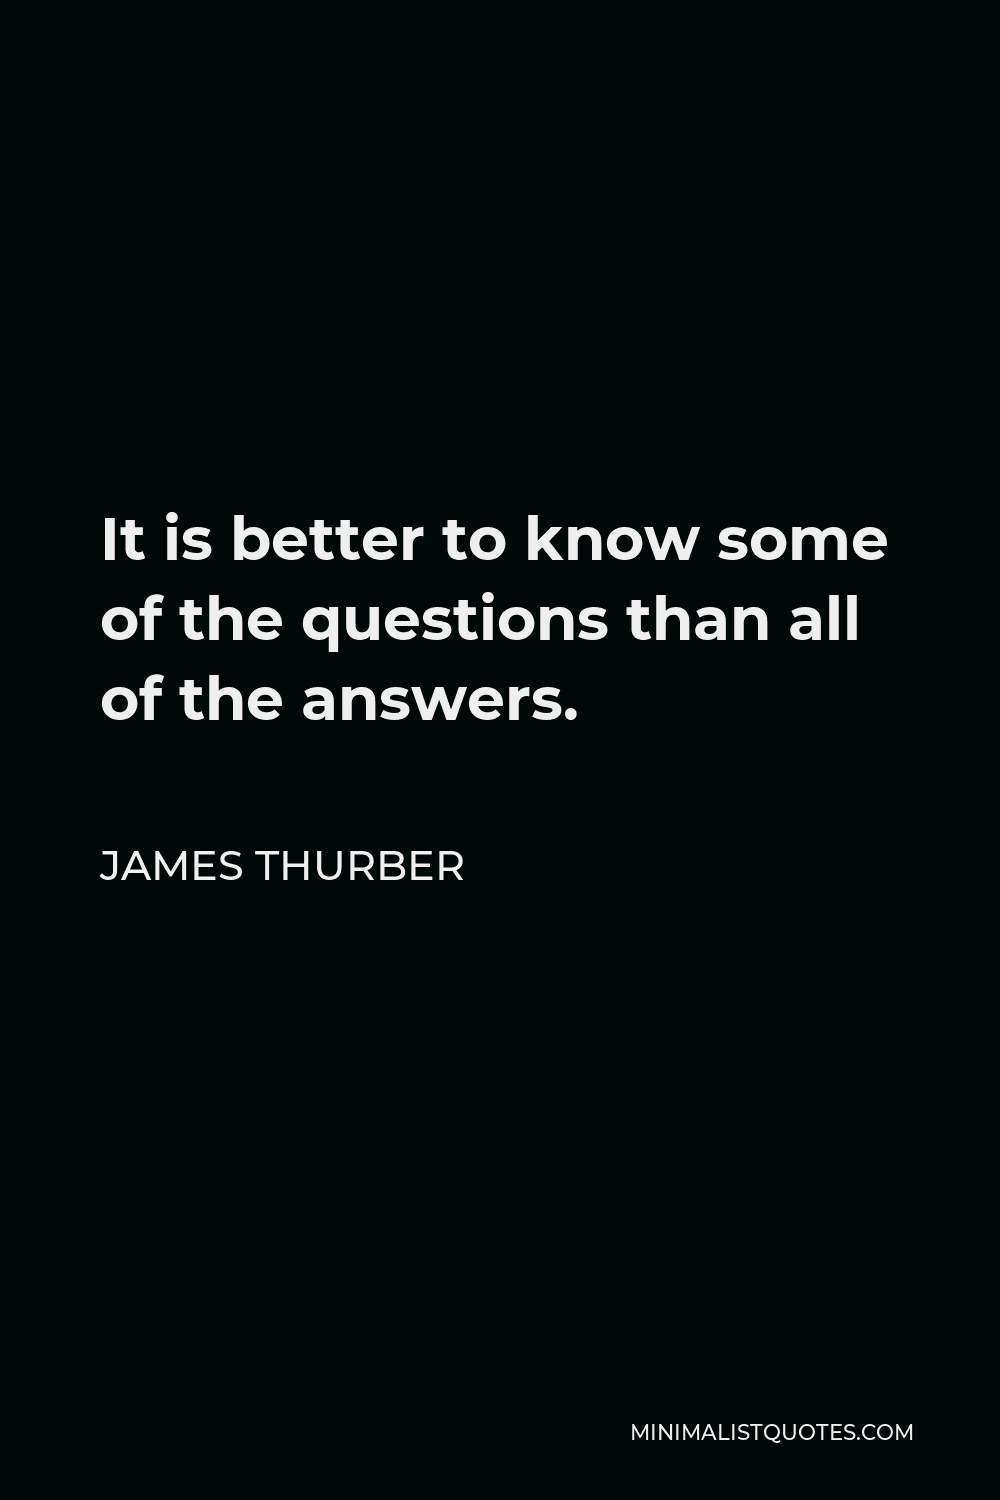 James Thurber Quote - It is better to know some of the questions than all of the answers.